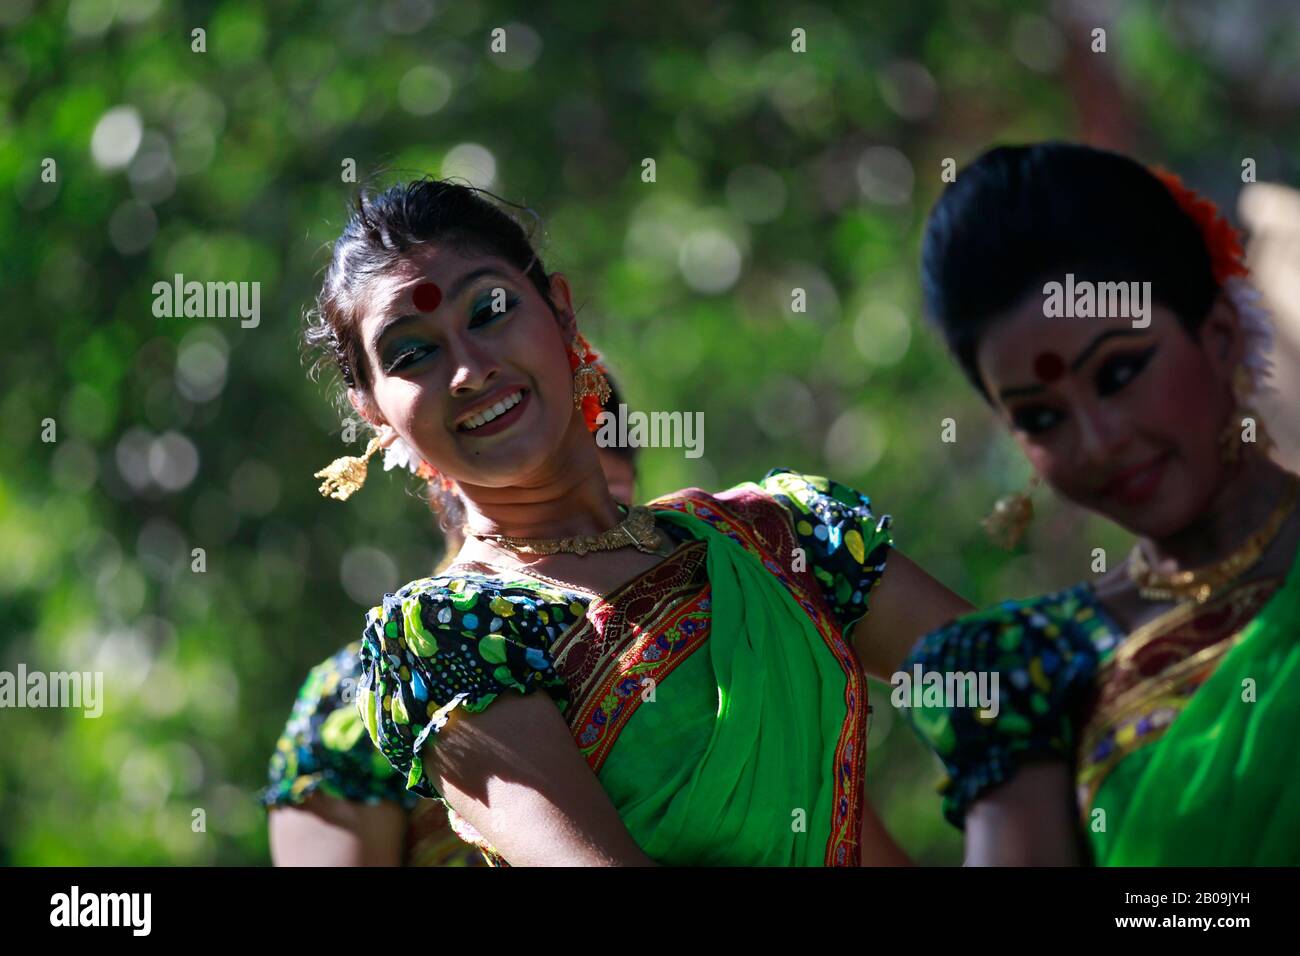 Women perform a dance at the Bakultala premises of the Fine Arts Institute of Dhaka University to mark the festival of harvest or Nobanno Utshab. The festival is held especially in the rural areas in late November to celebrate harvesting of Aman the main crop of the year in Bangladesh. Dhaka, Bangladesh. November 15, 2010. Stock Photo